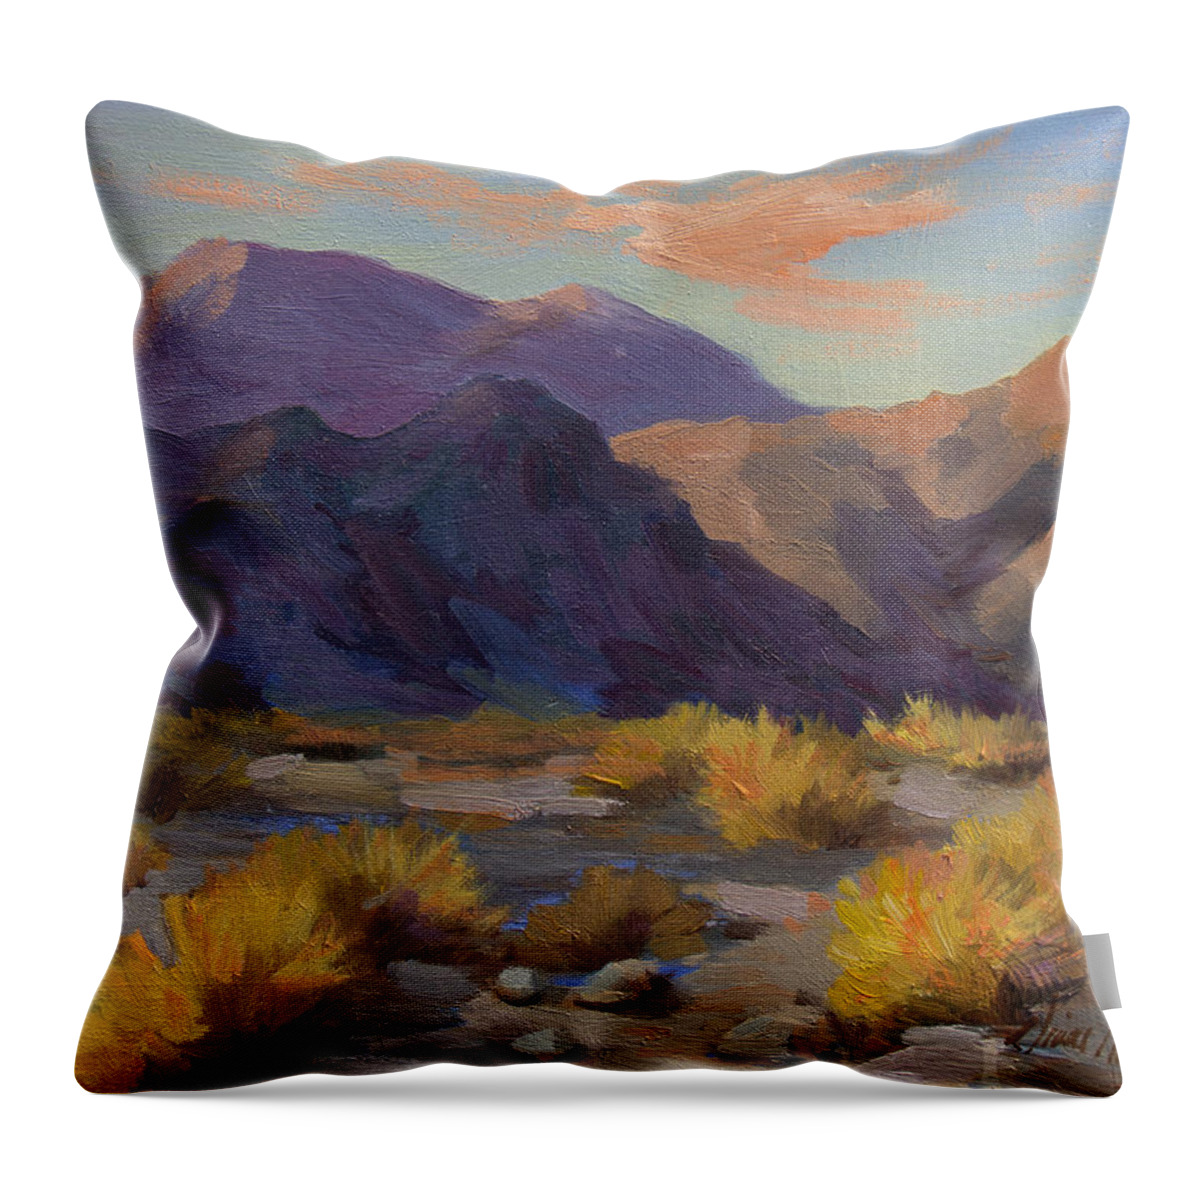 Afternoon Throw Pillow featuring the painting A Peaceful Afternoon in La Quinta Cove by Diane McClary